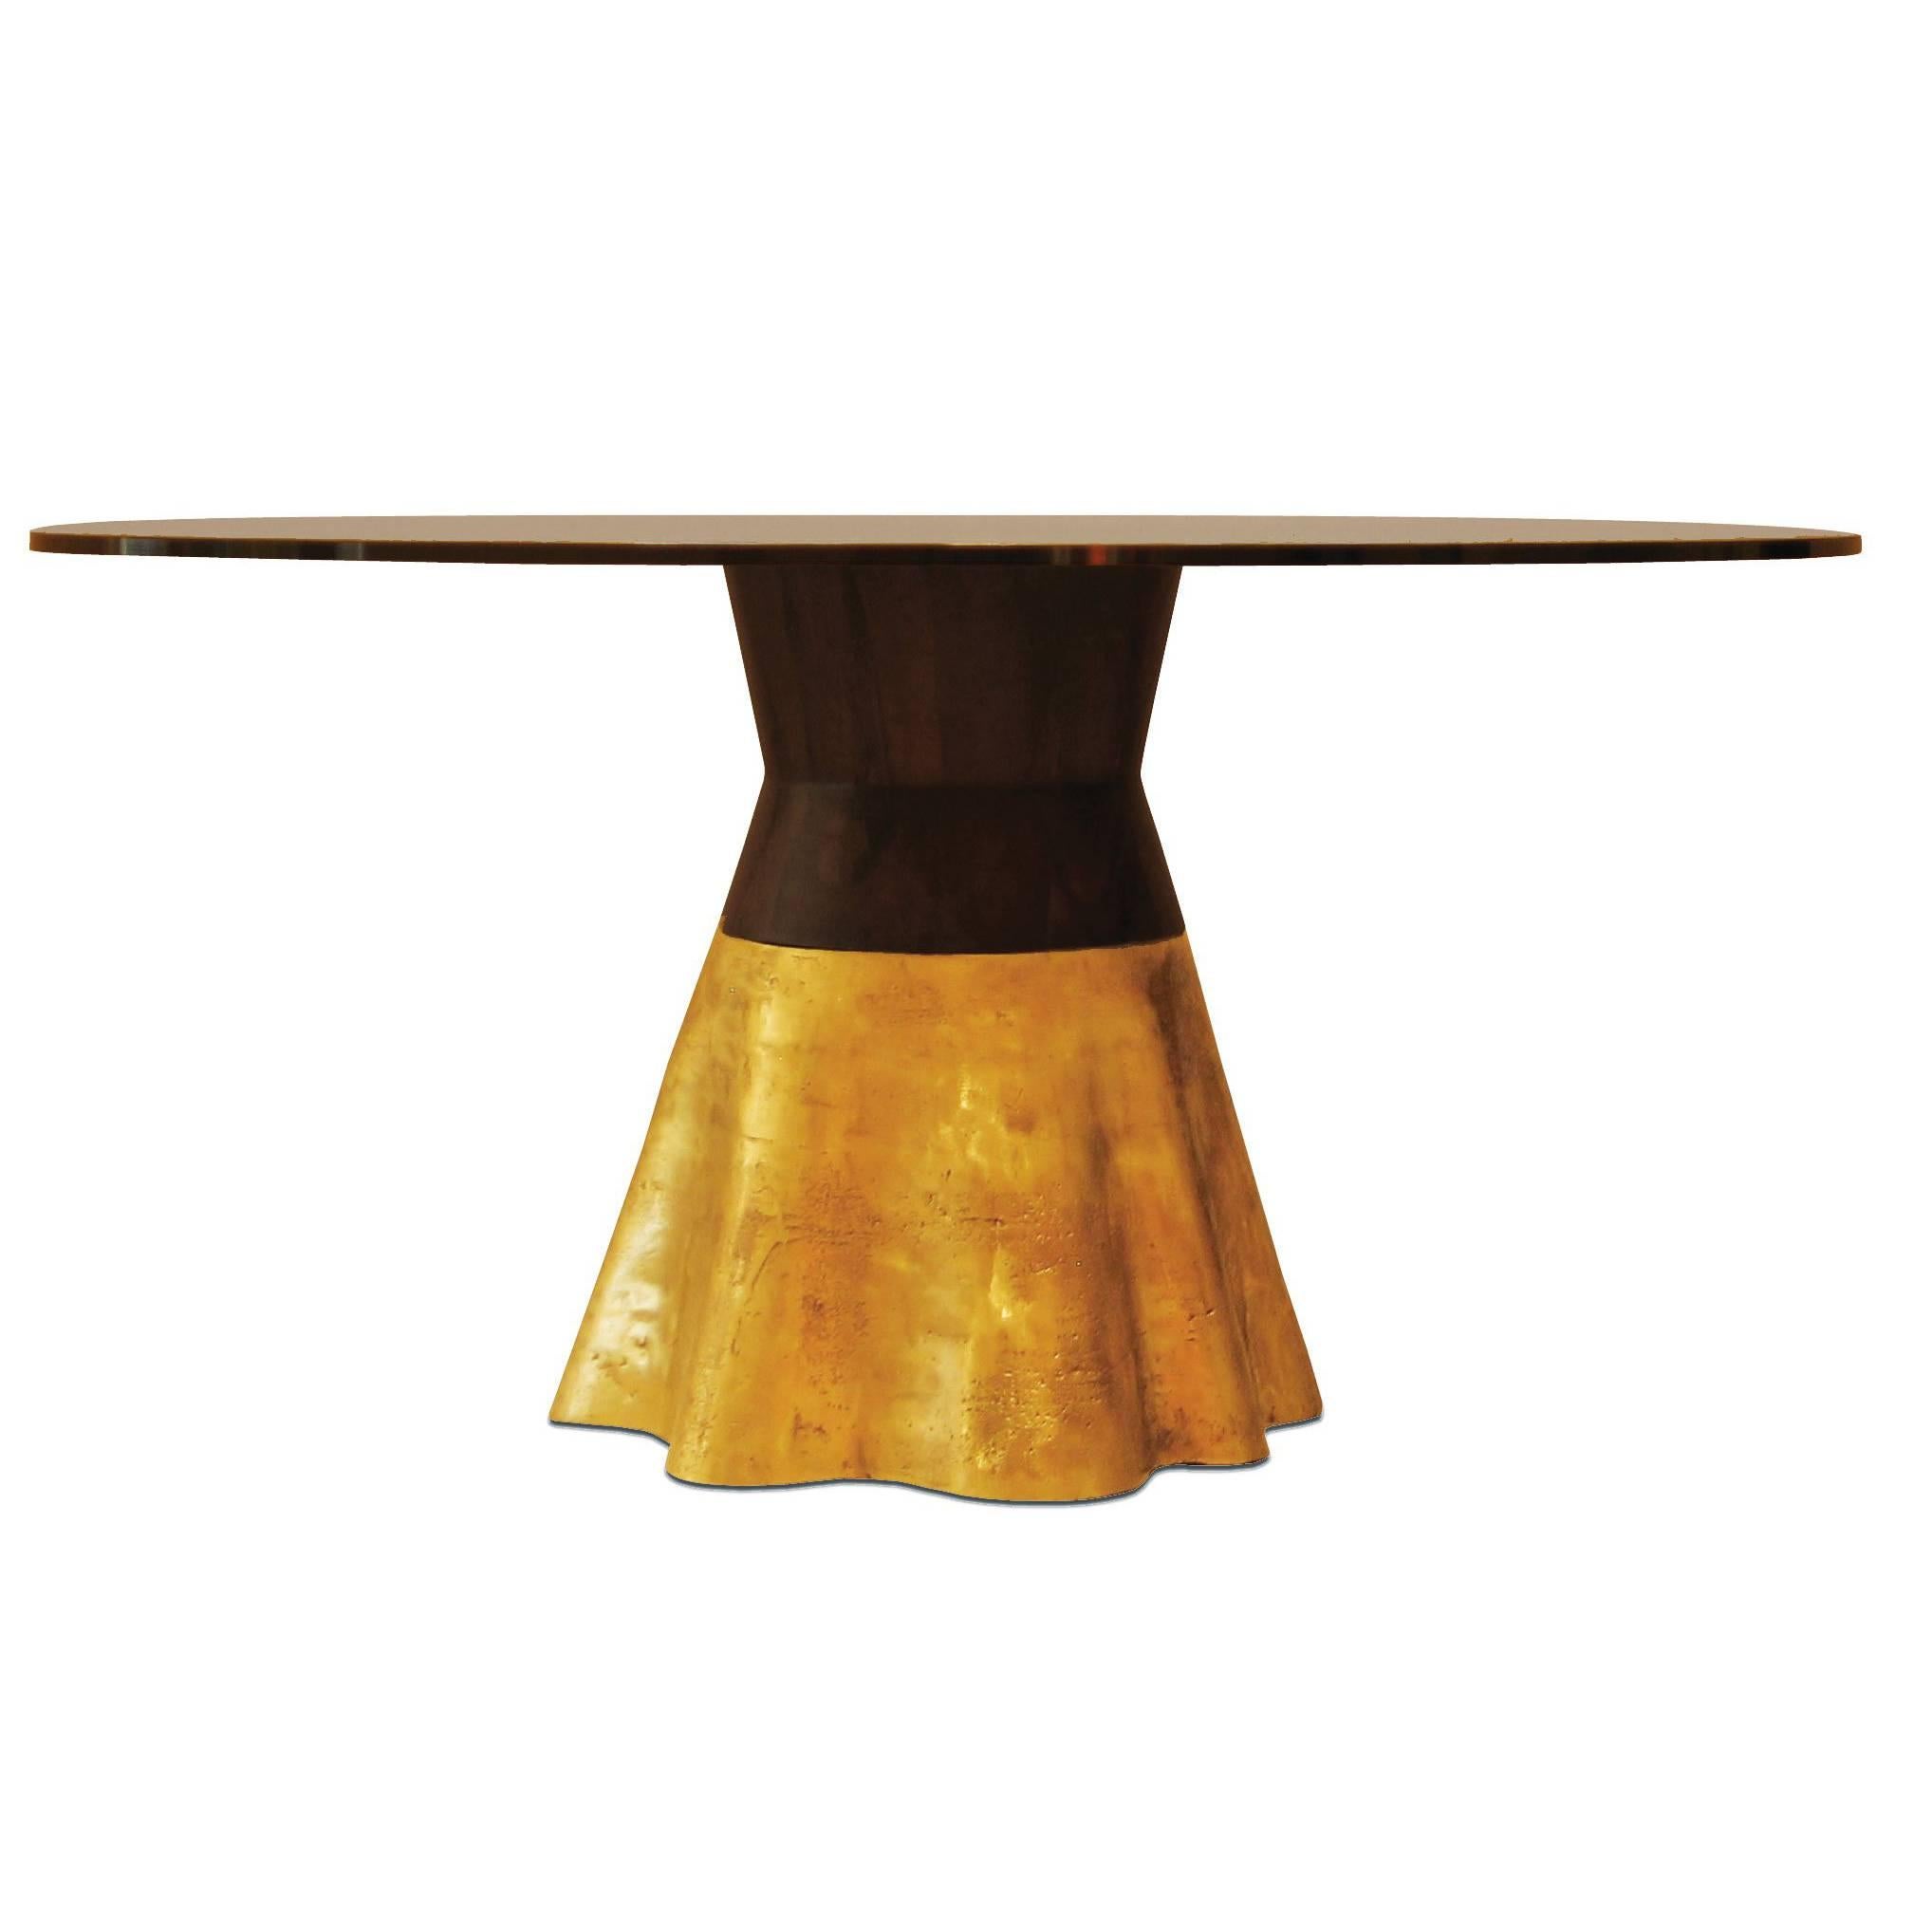 21st Century Round Dining Table in Cast Bronze from Costantini, Tavola 9